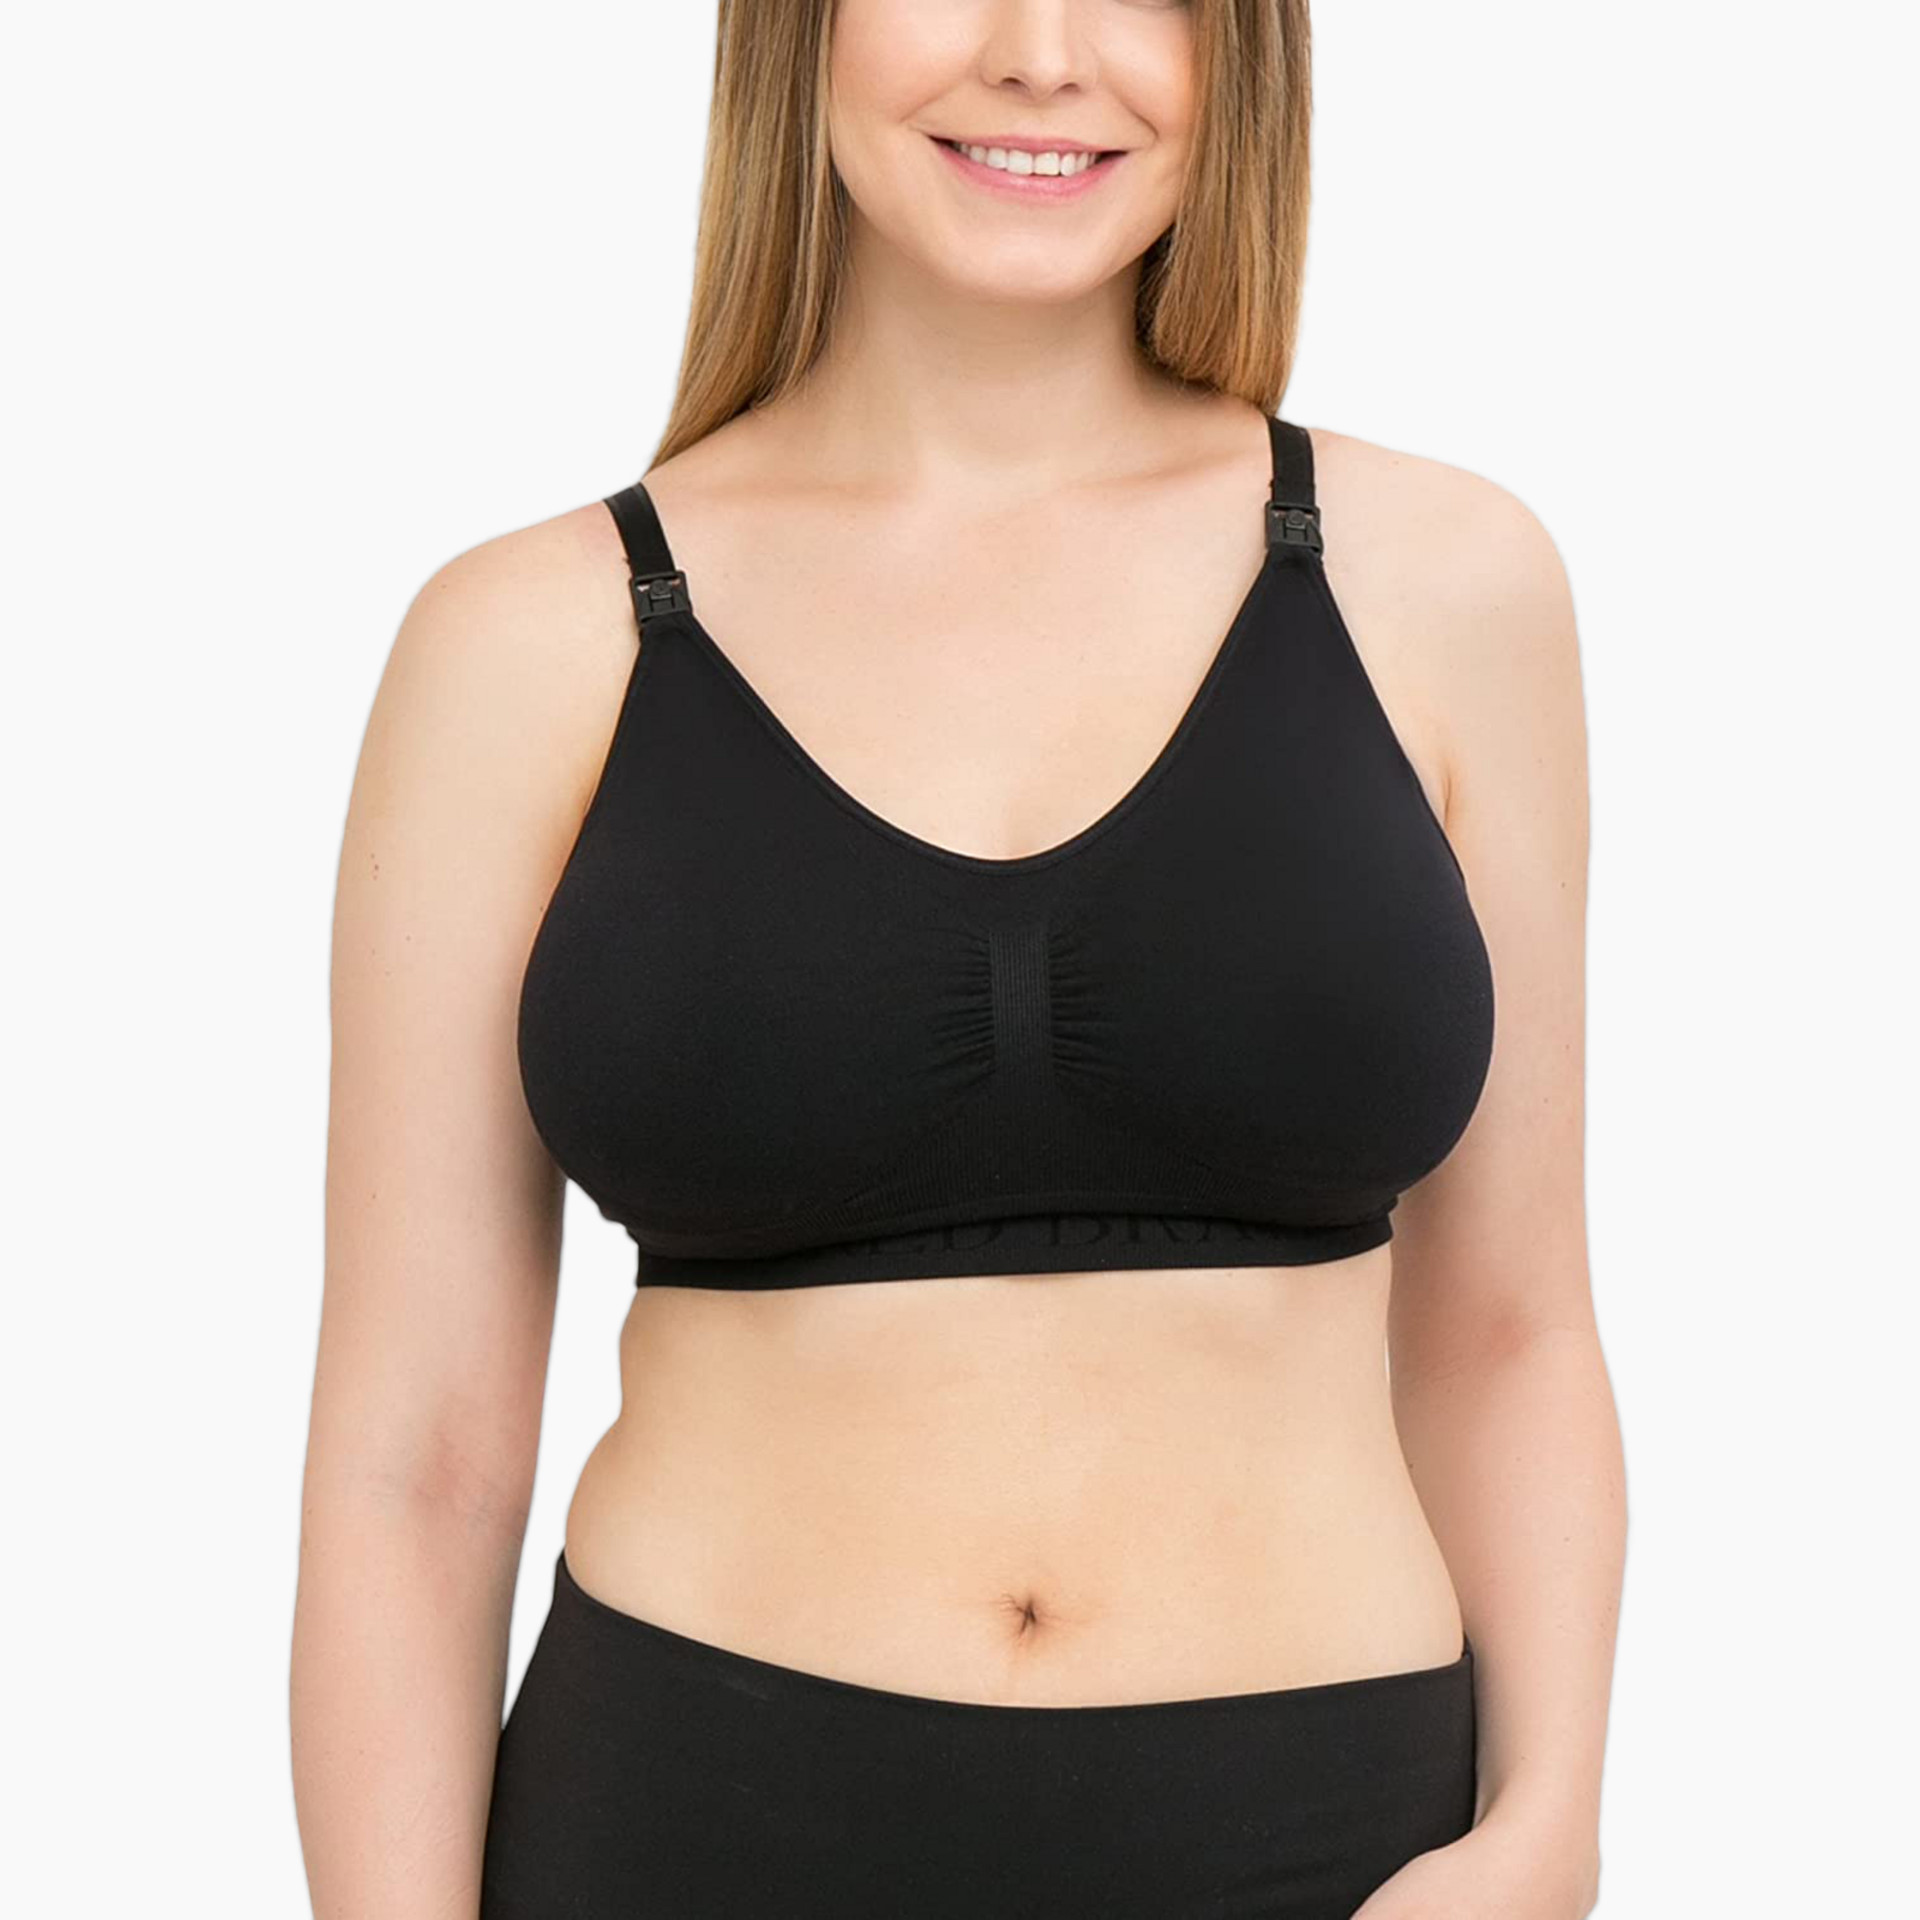 Buy Kindred Bravely Signature Sublime Contour Maternity